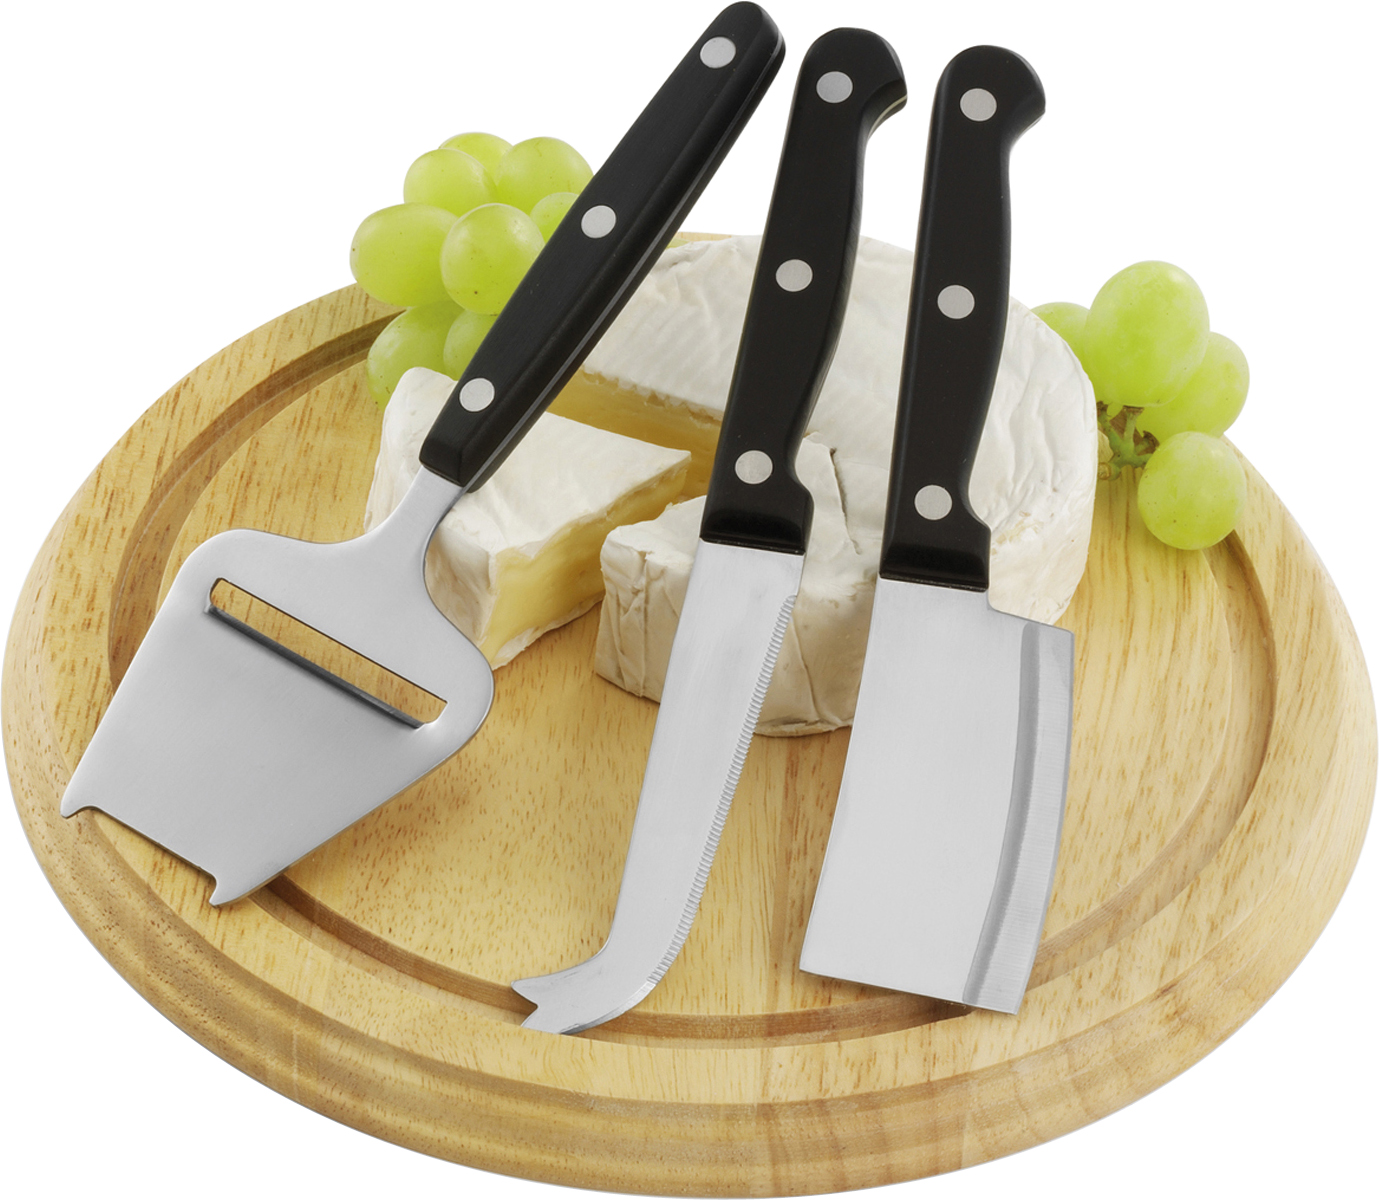 004652 011999999 3d045 ovr pro01 fal - Cheese board